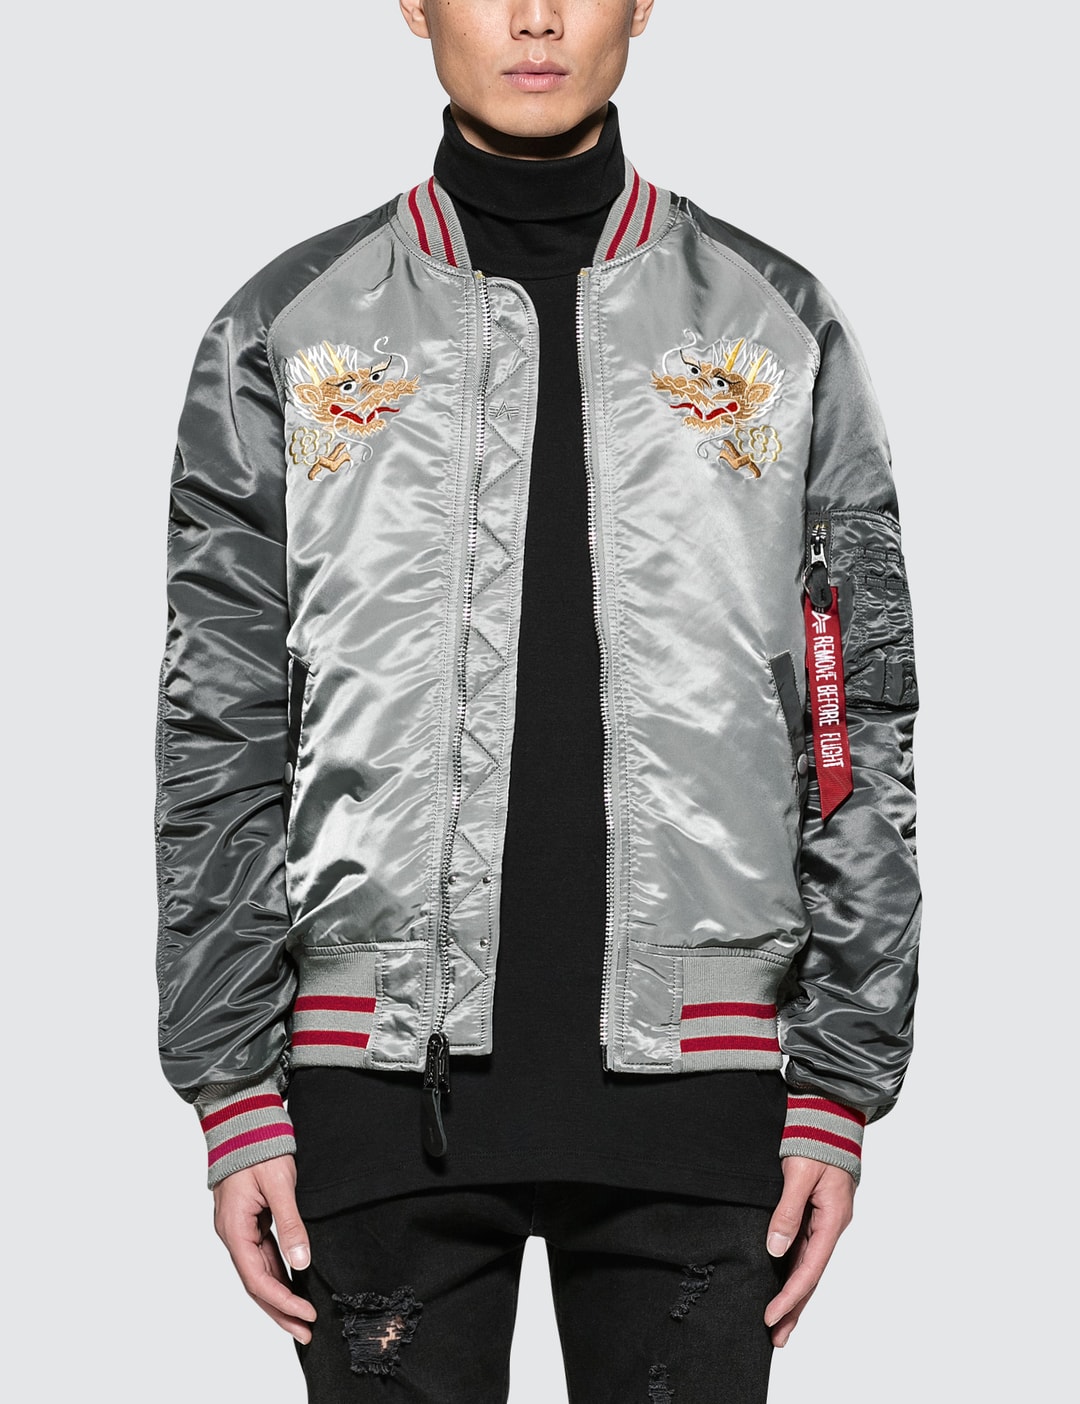 | Globally MA-1 HBX - Jacket Dragon Double Industries Curated Hypebeast Souvenir - Lifestyle Fashion and Alpha by